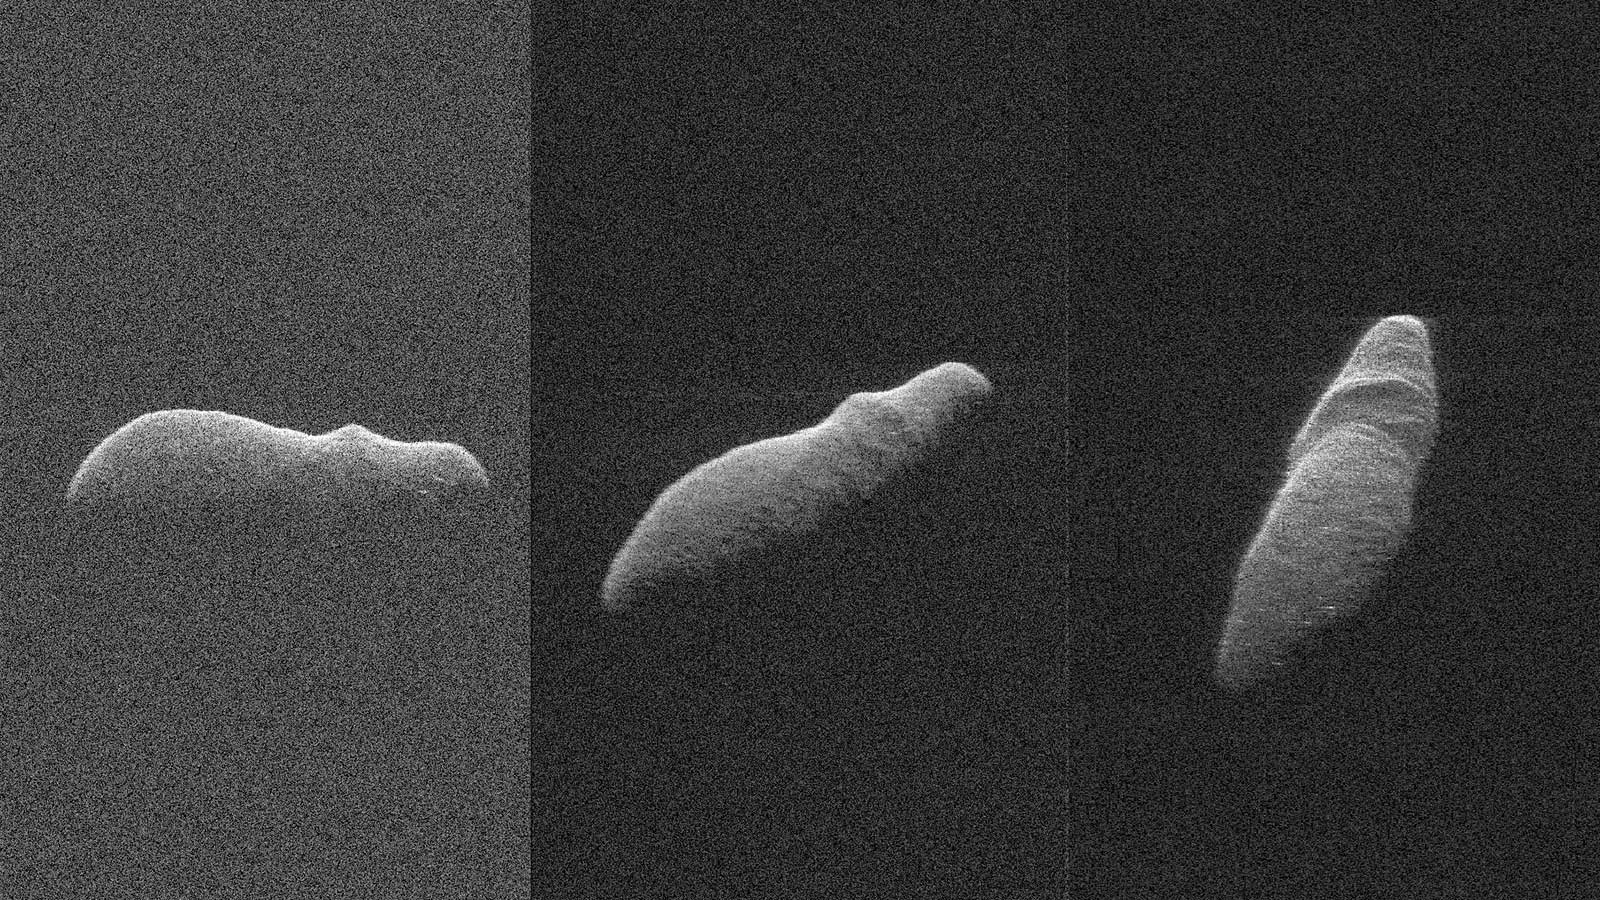 Fuzzy images of potato-shaped asteroid.